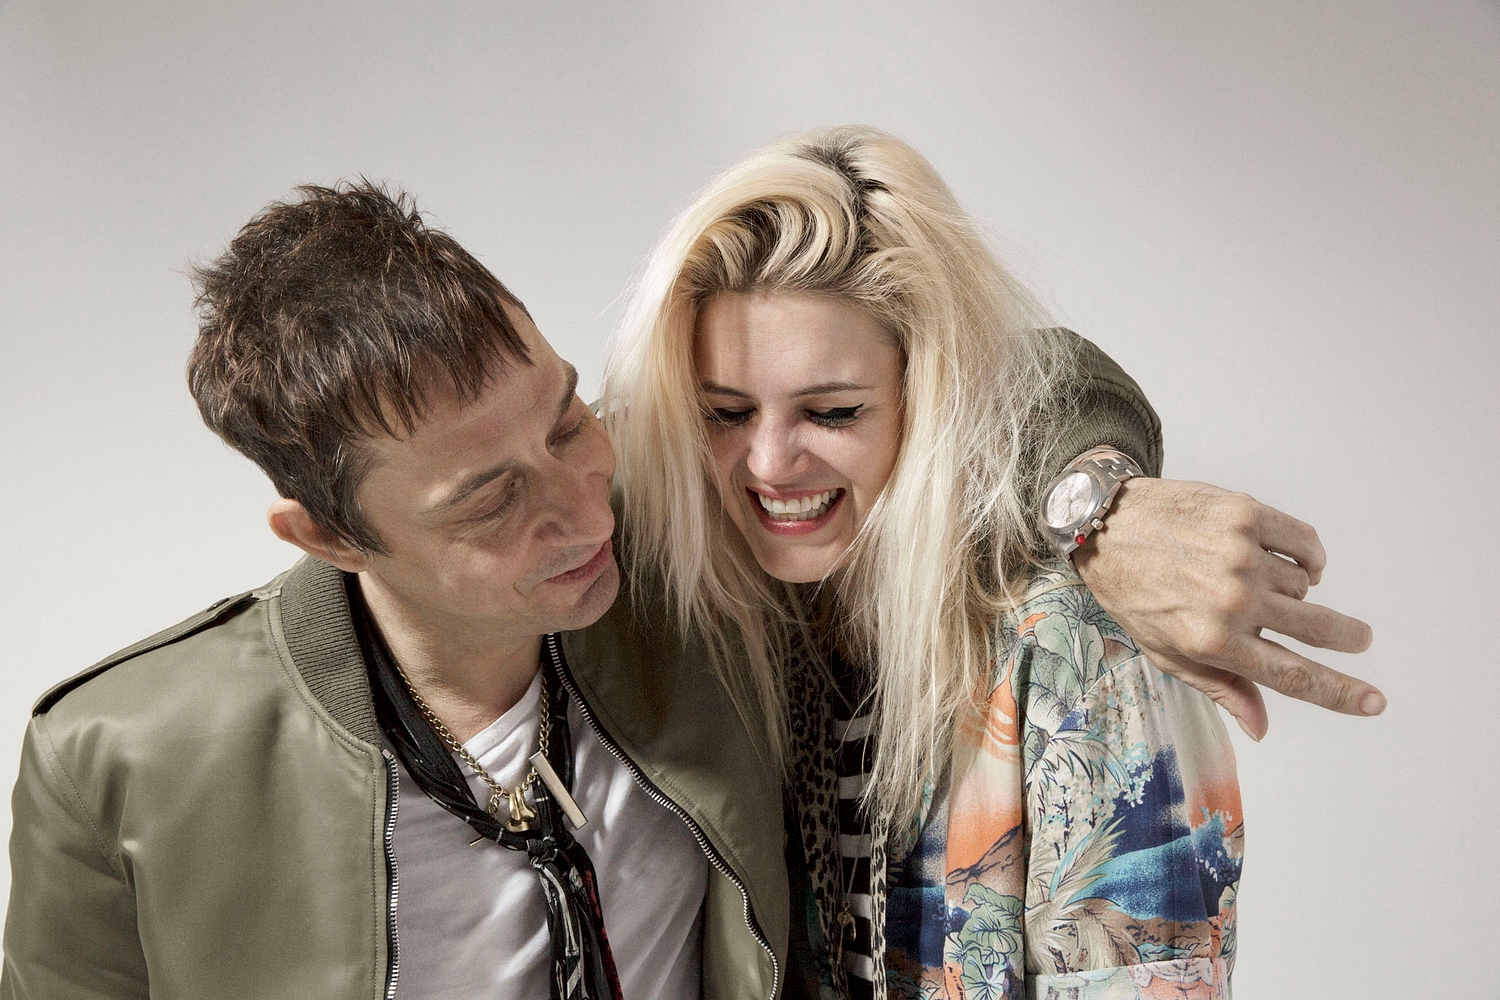 The Kills are playing a 15th anniversary show in London